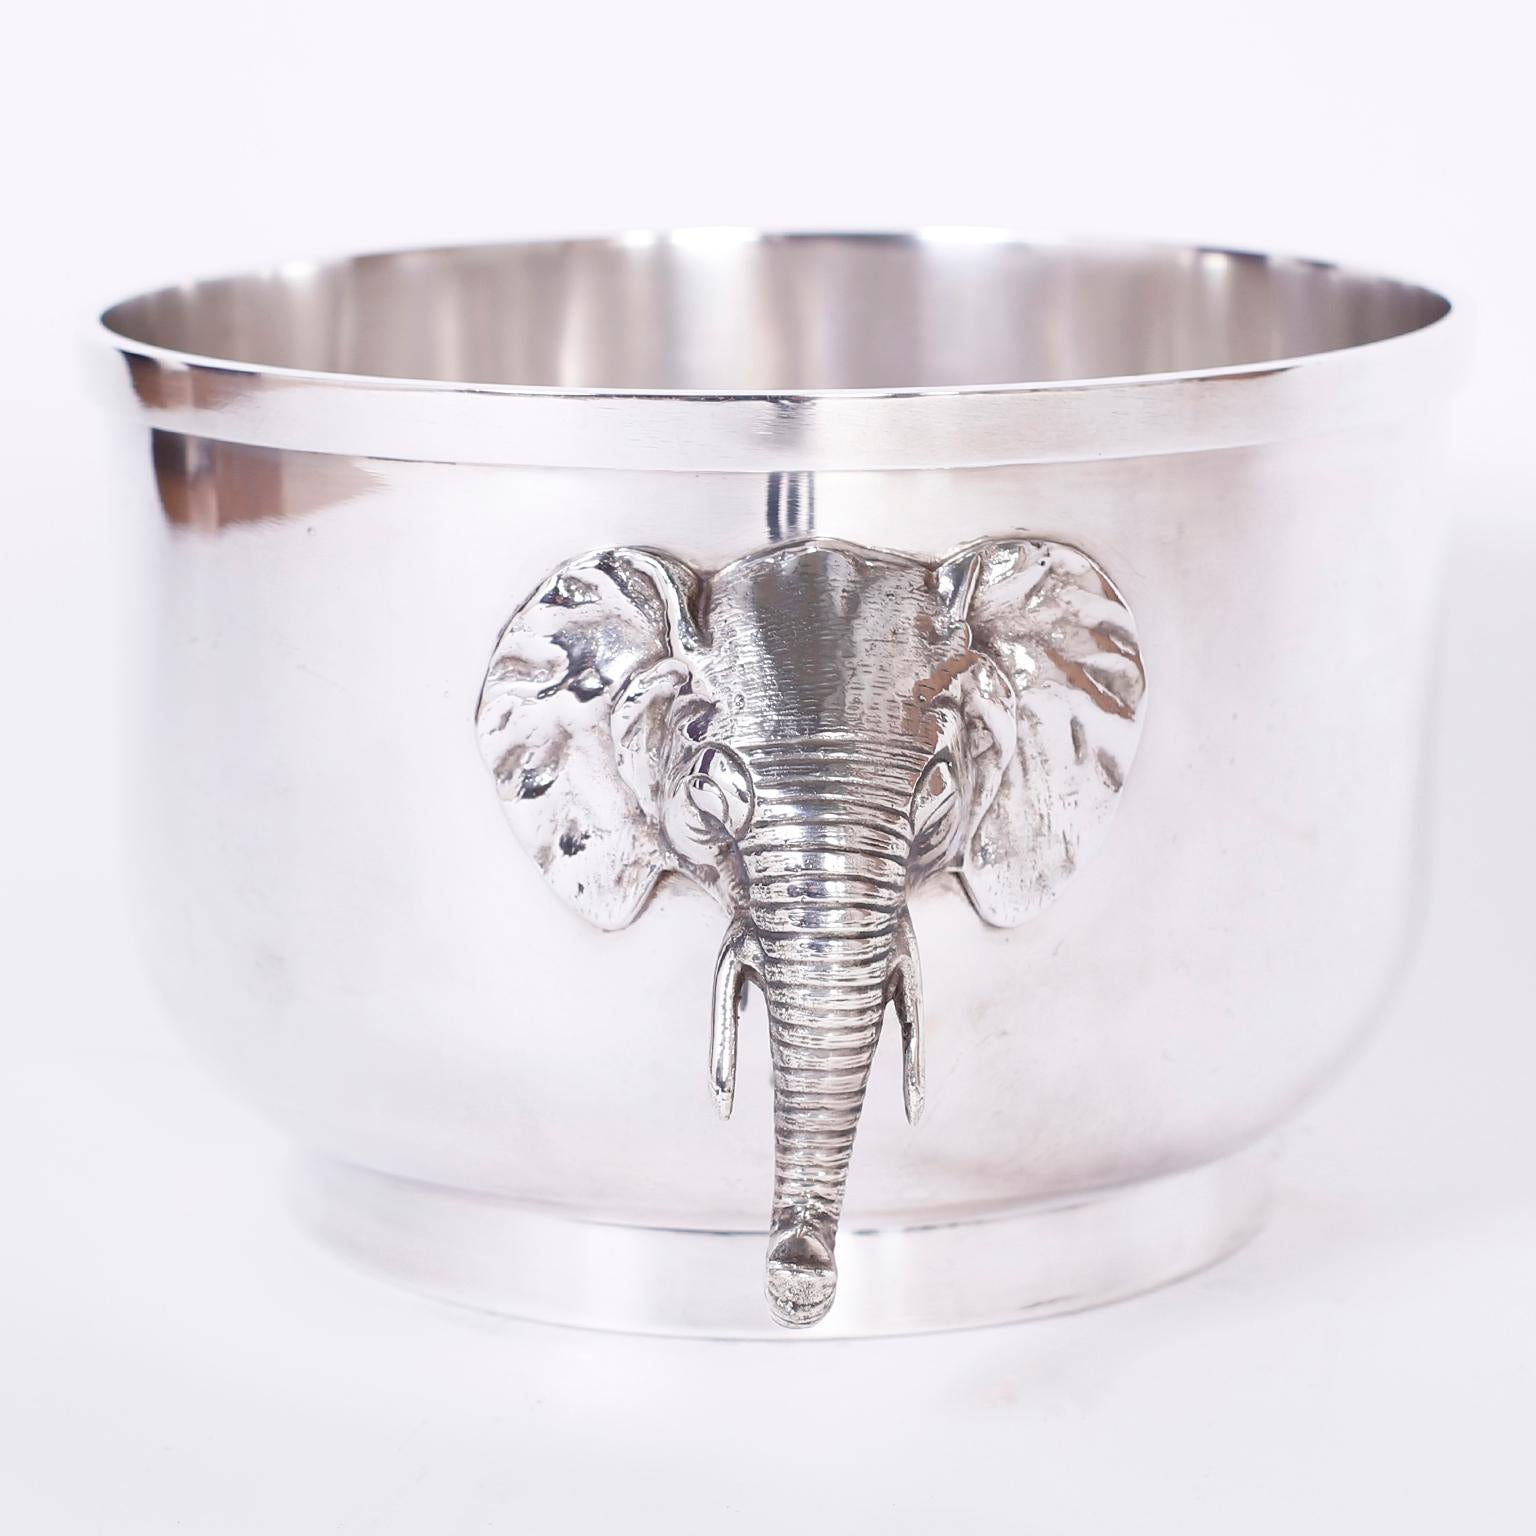 Mid Century British Colonial SilverPlated Jardiniere In Good Condition For Sale In Palm Beach, FL